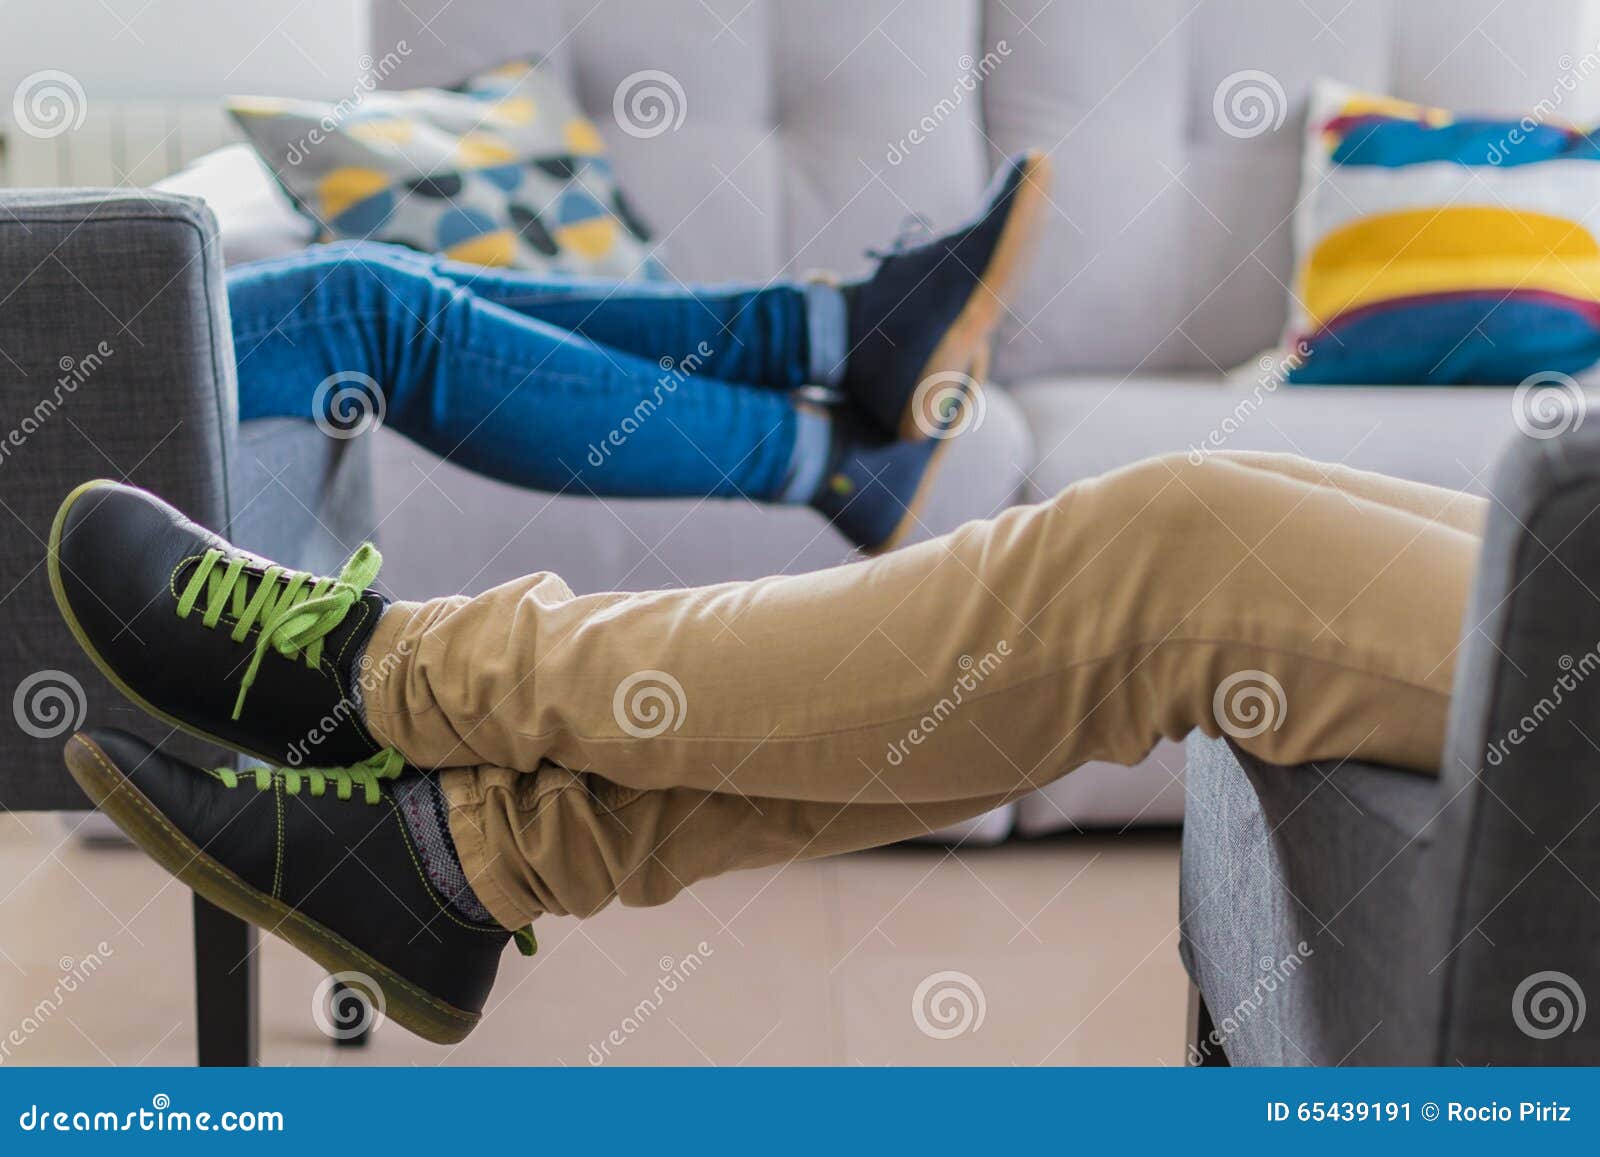 Woman Legs Resting on the Couch Armrest Stock Image - Image of shoe ...